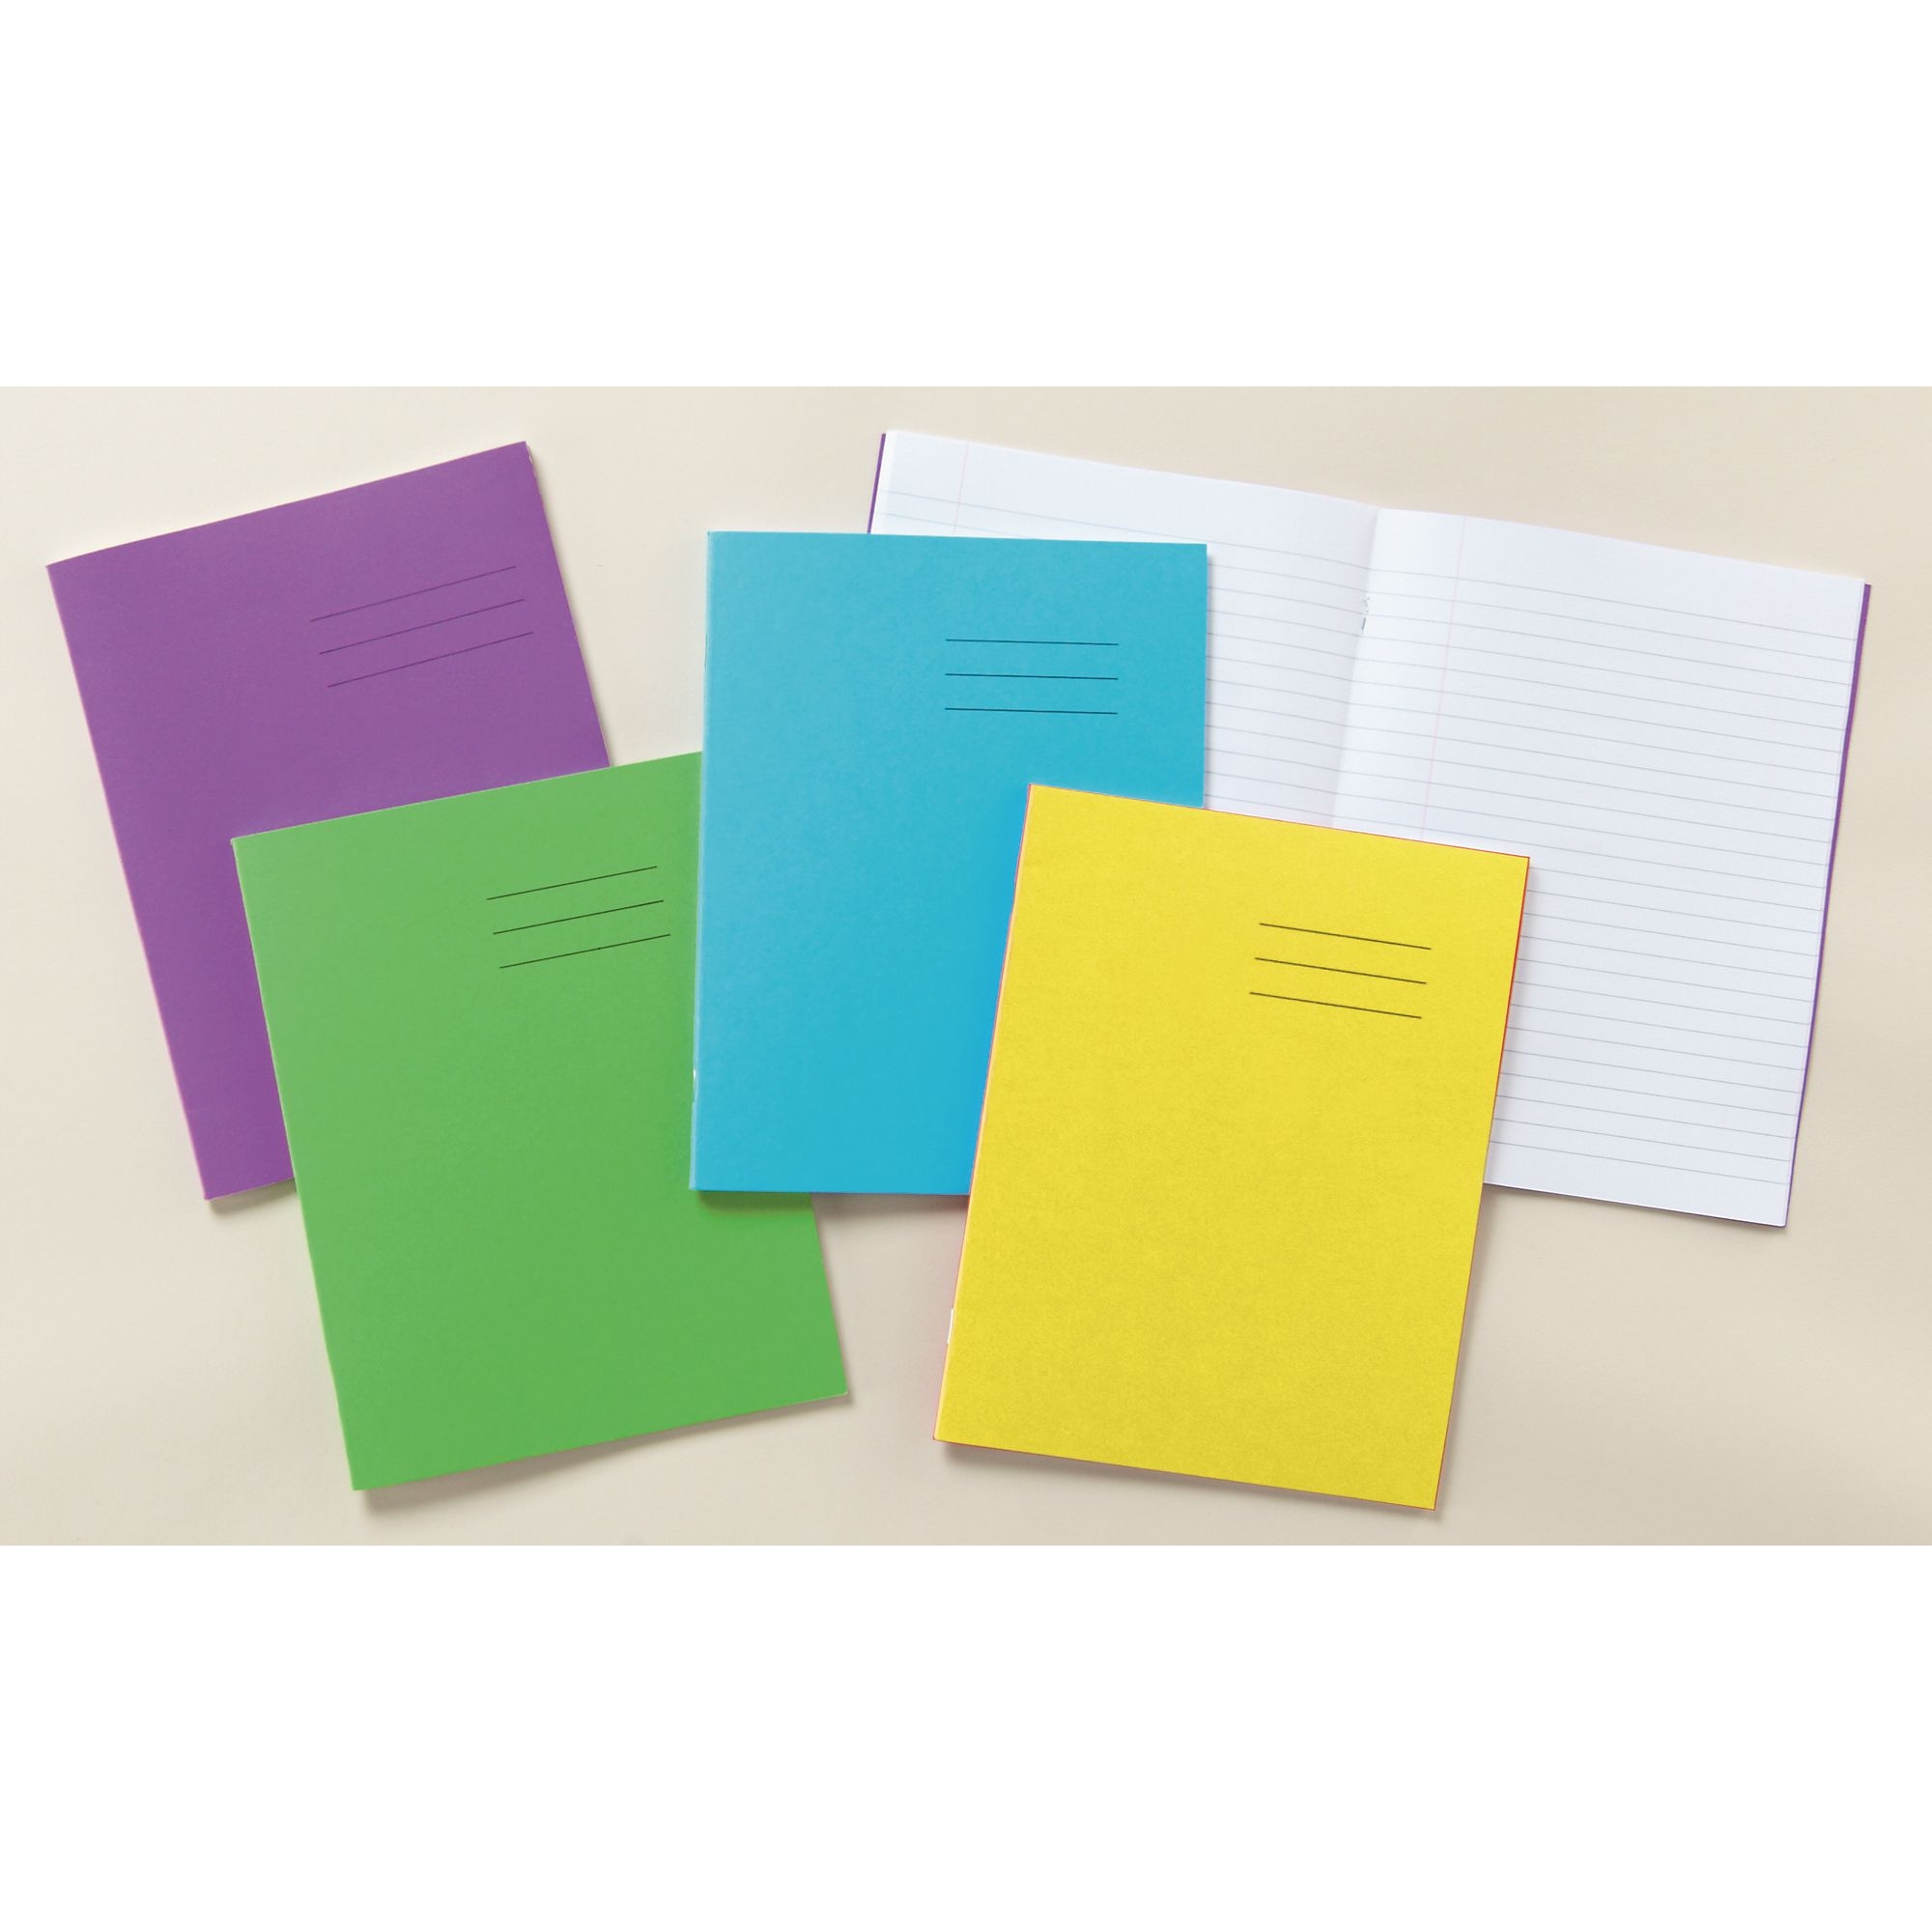 Red 9x7" Exercise Book 120-Page, 8mm Ruled With Margin - Pack of 50